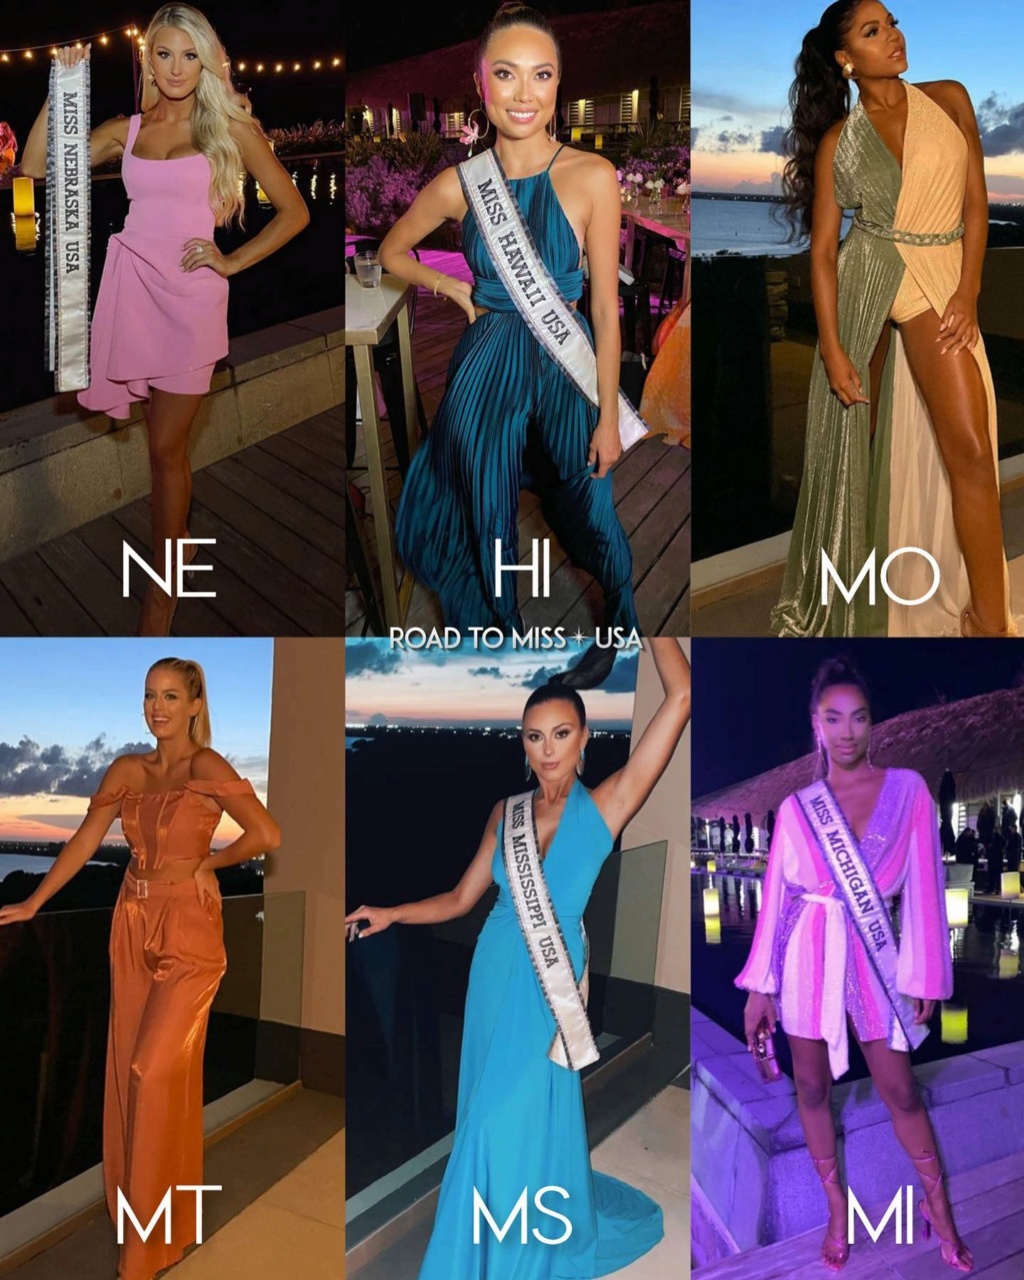 ROAD TO MISS USA 2021 is KENTUCKY! - Page 4 24208912